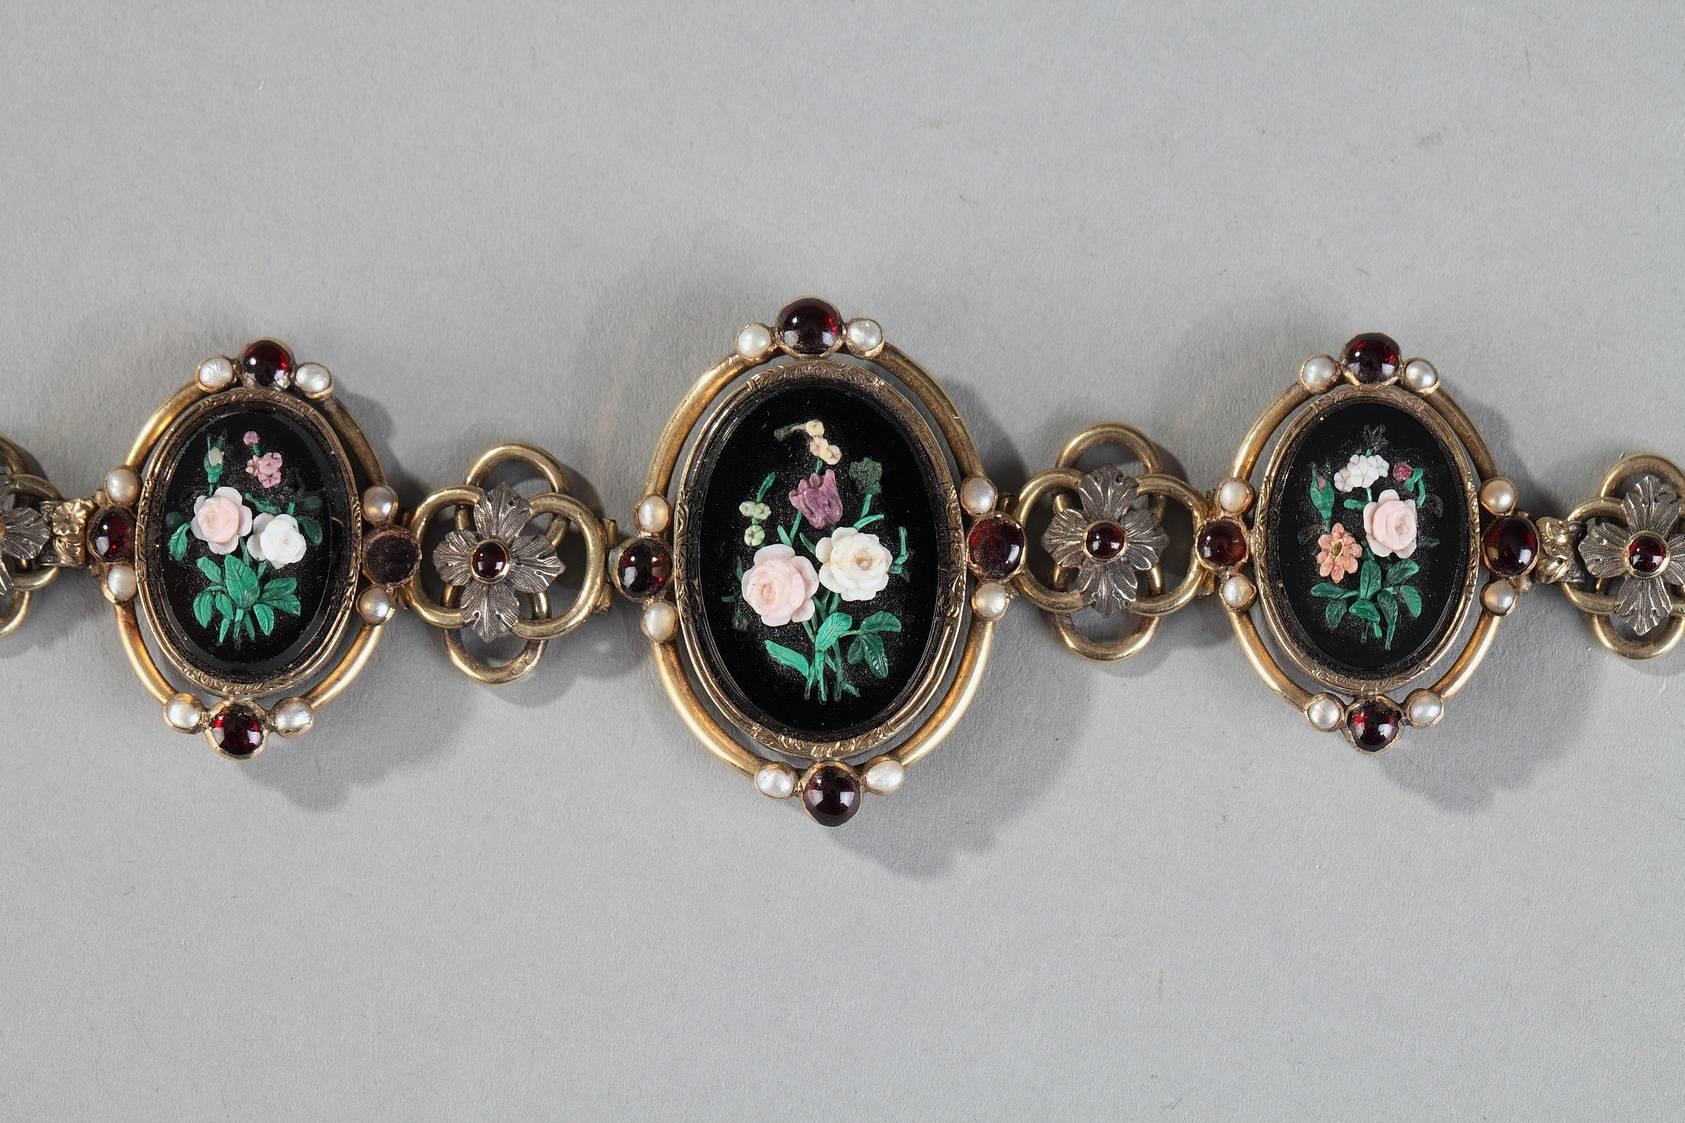 Women's Mid-19th Century Silver-Gilt Bracelet with Micromosaic Medallions For Sale